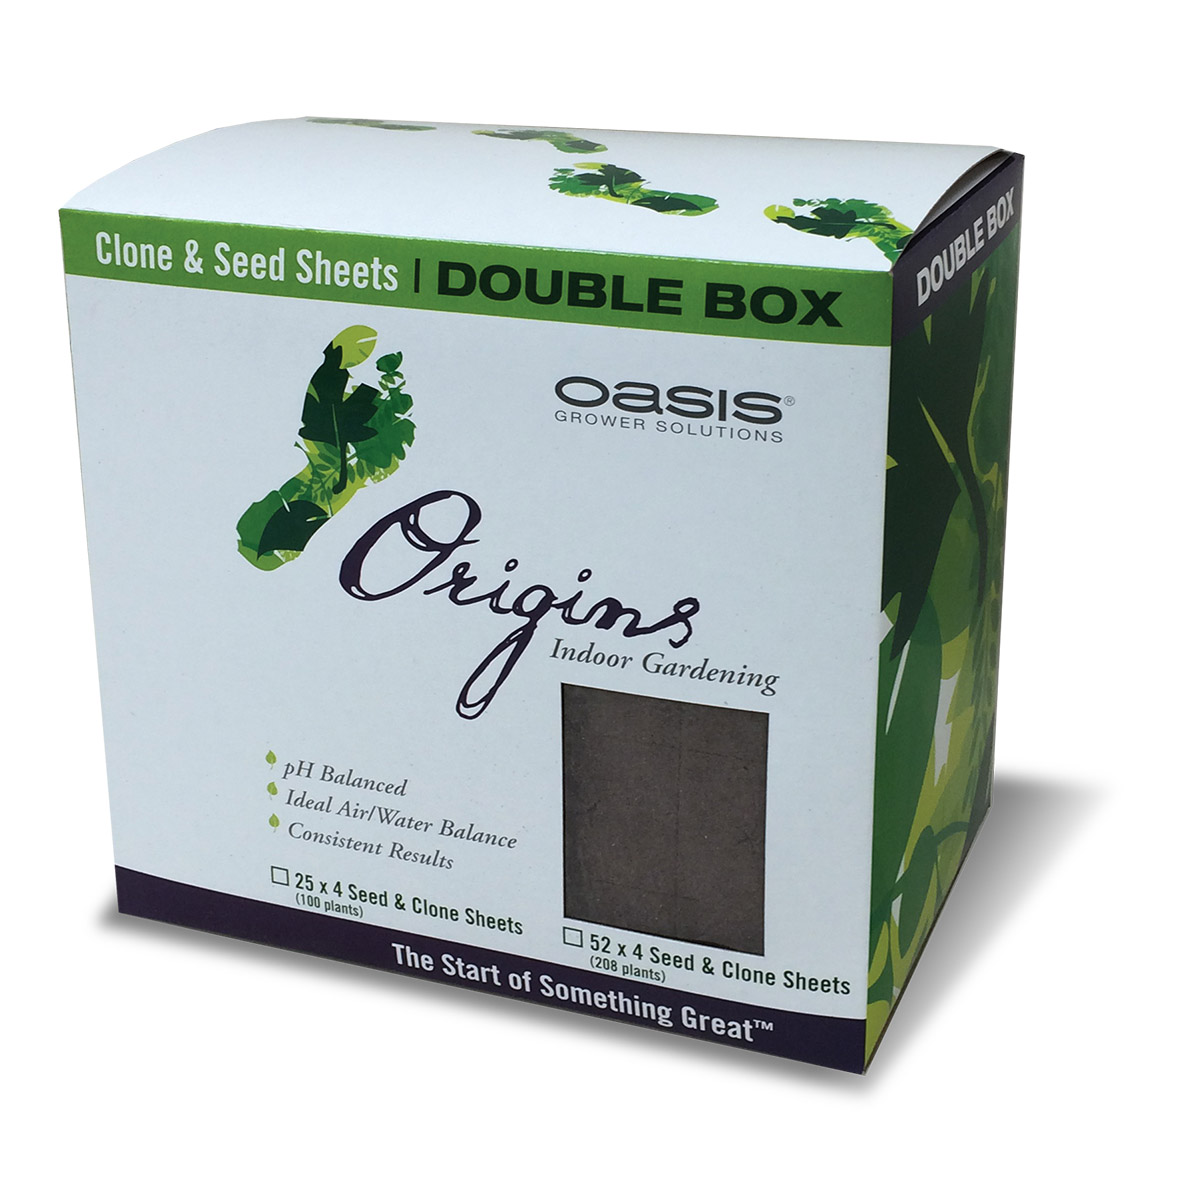 Oasis Origins Seed and Clone Double Box, 1.5" x 1.5", 10 per cas